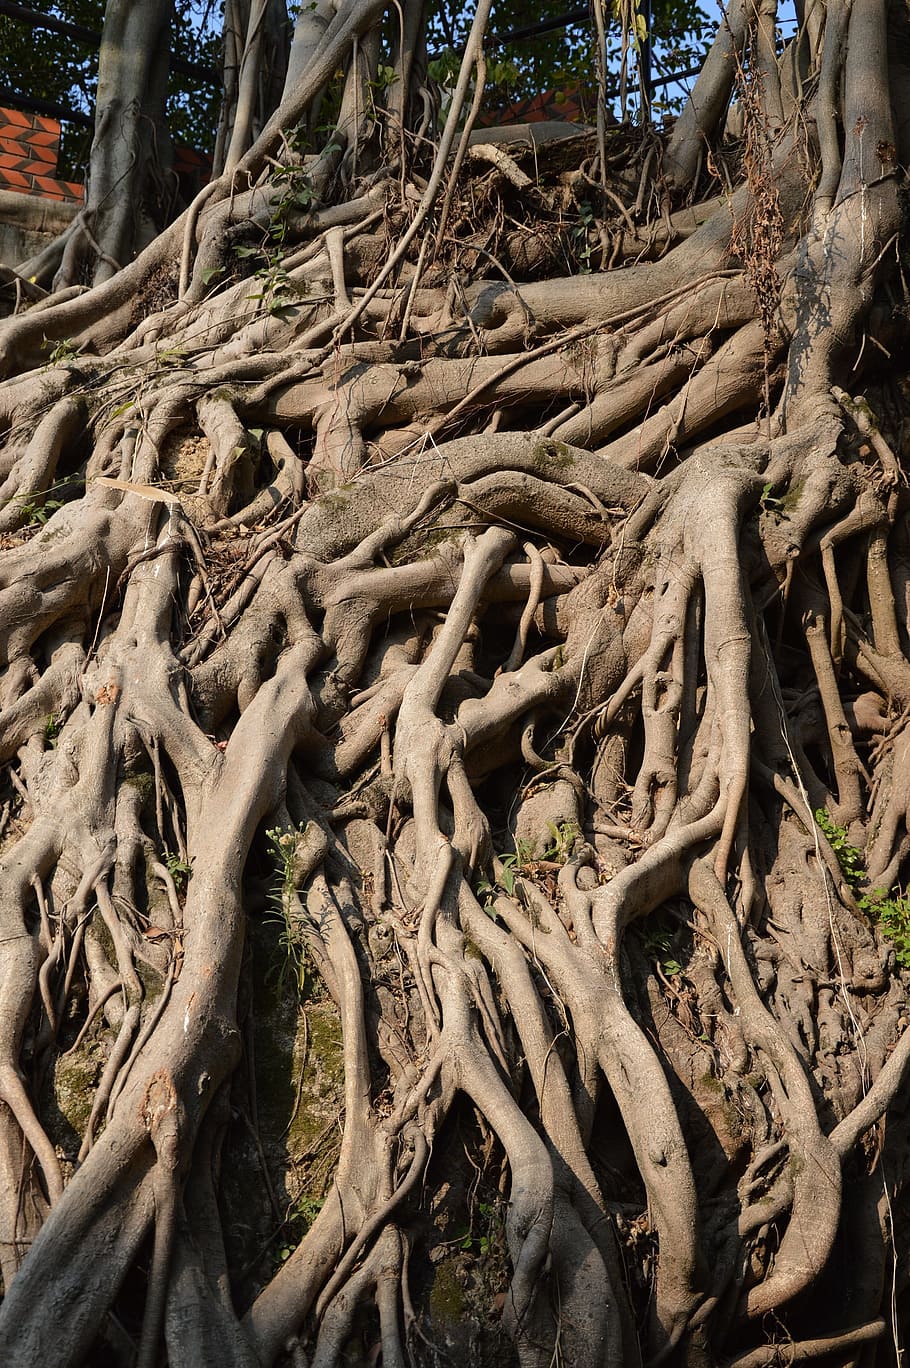 Roots, Trees, Banyan, Ficus, Woods, woody, wooden, growth, growing, large